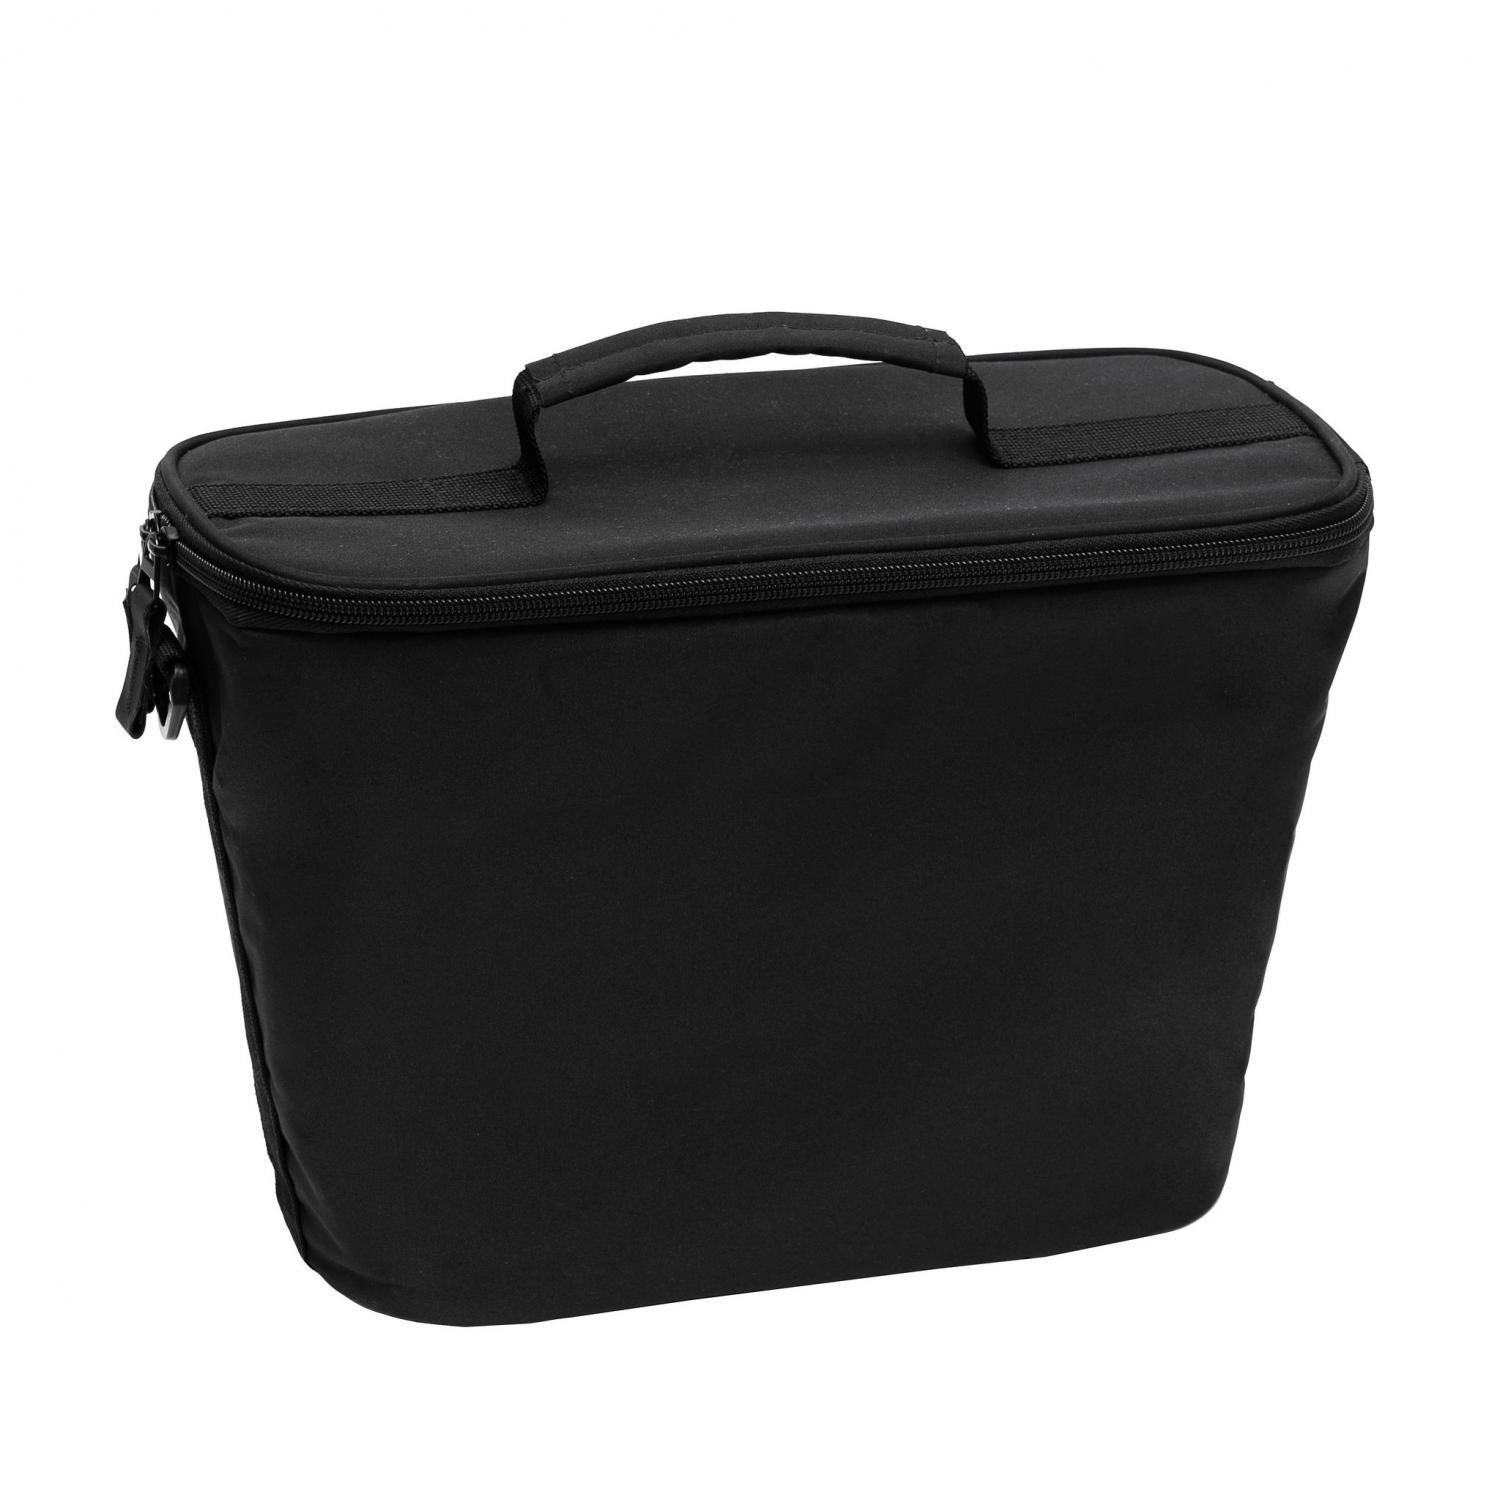 Small Cooler  With Pocket  Small cooler Bags Fun bags